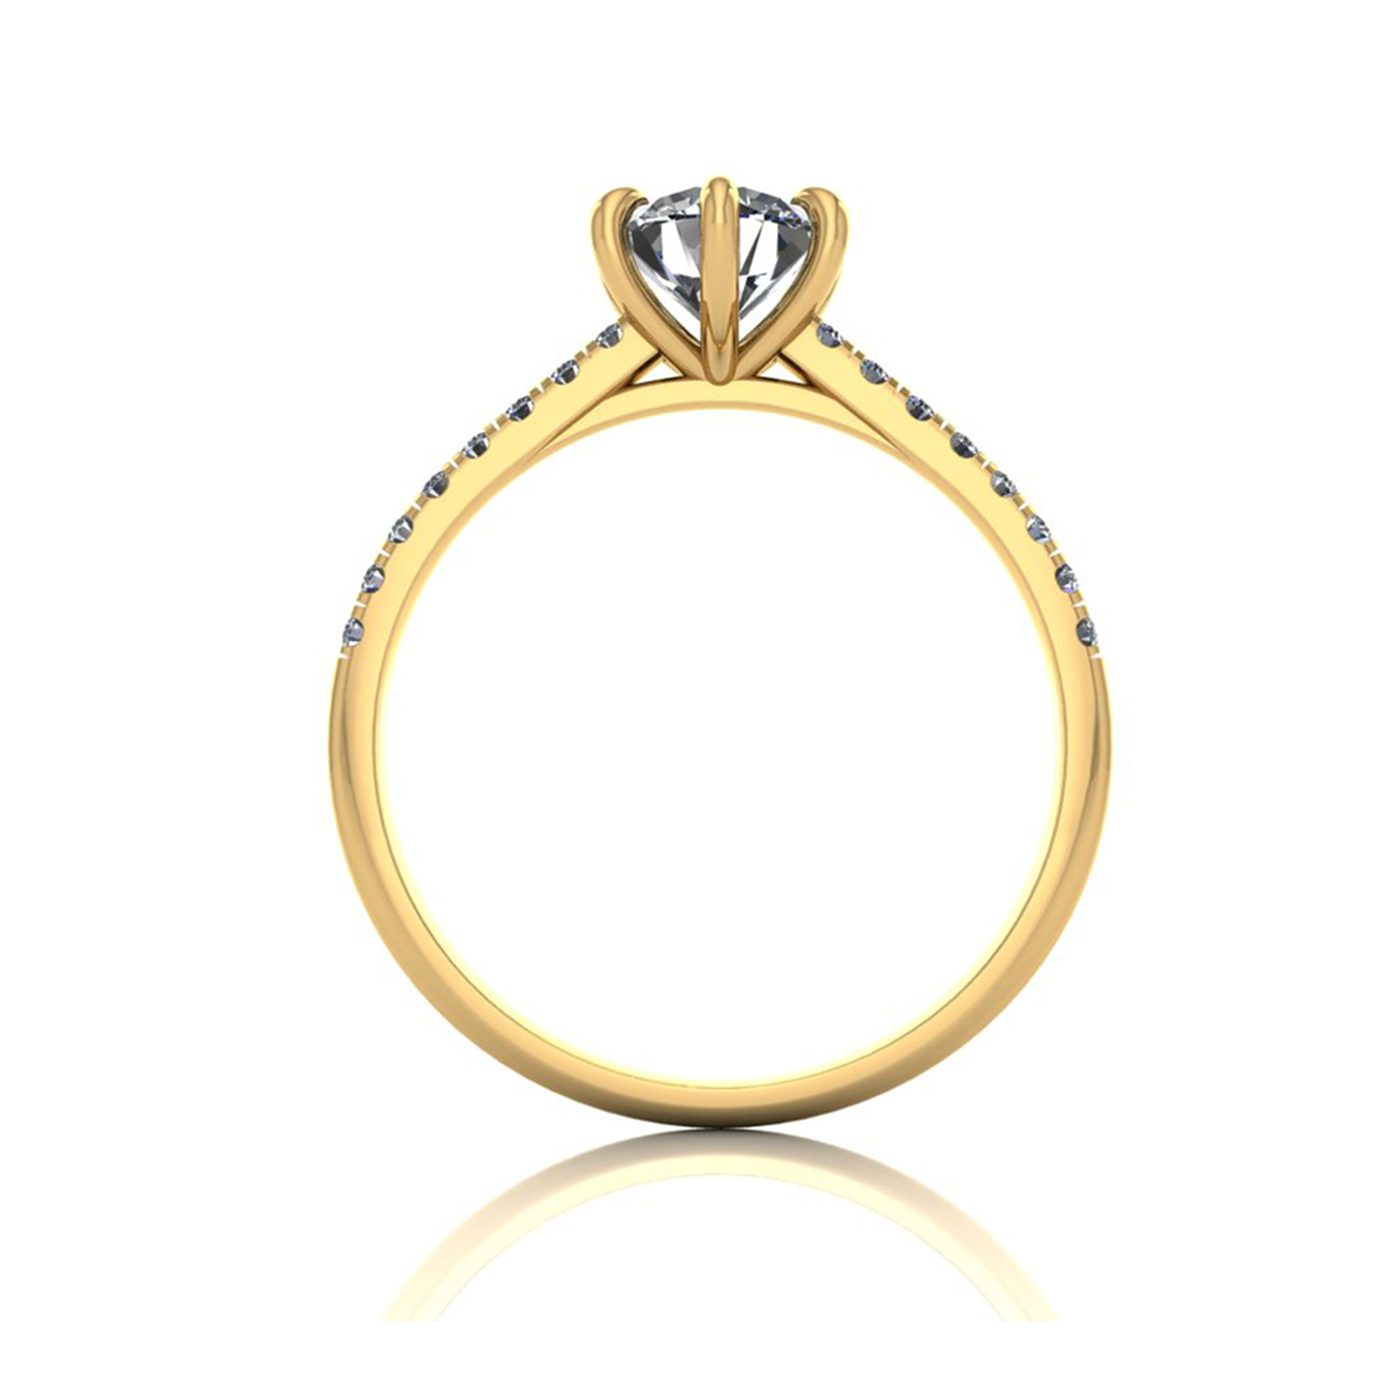 18k yellow gold 0,80 ct 6 prongs round cut diamond engagement ring with whisper thin pavÉ set band